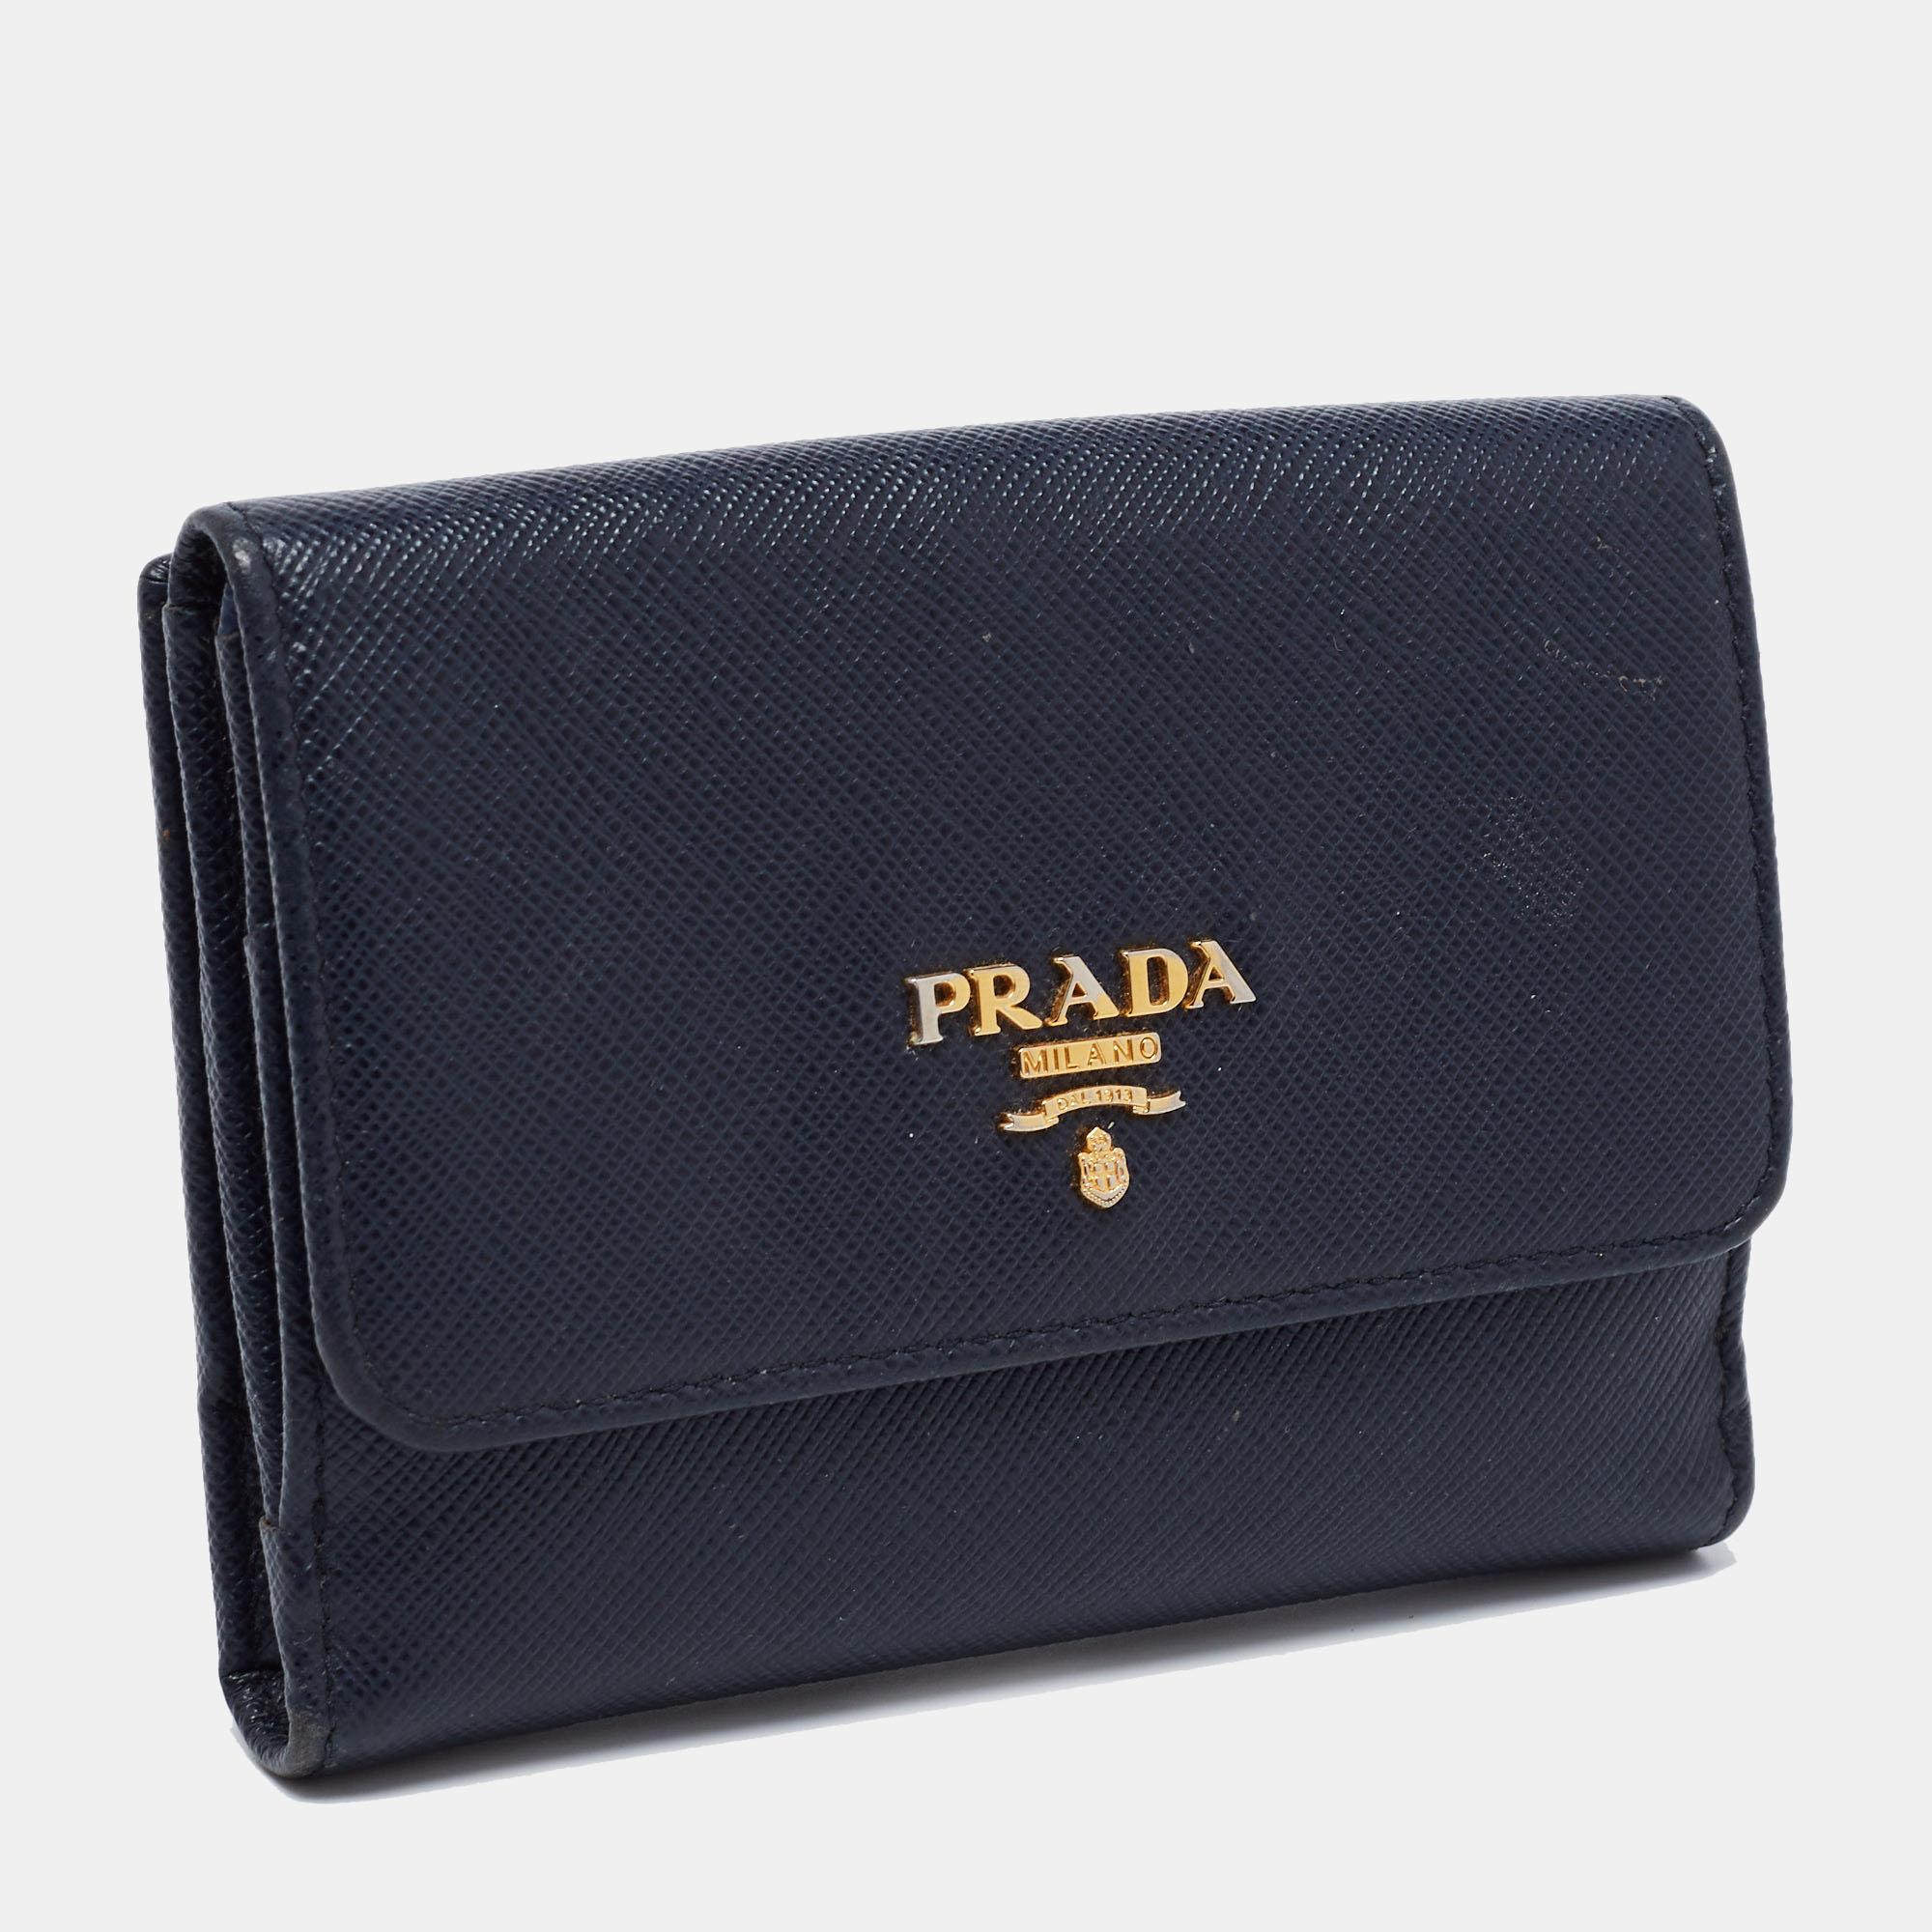 Black Prada Navy Blue Saffiano Metal Leather French Compact Wallet